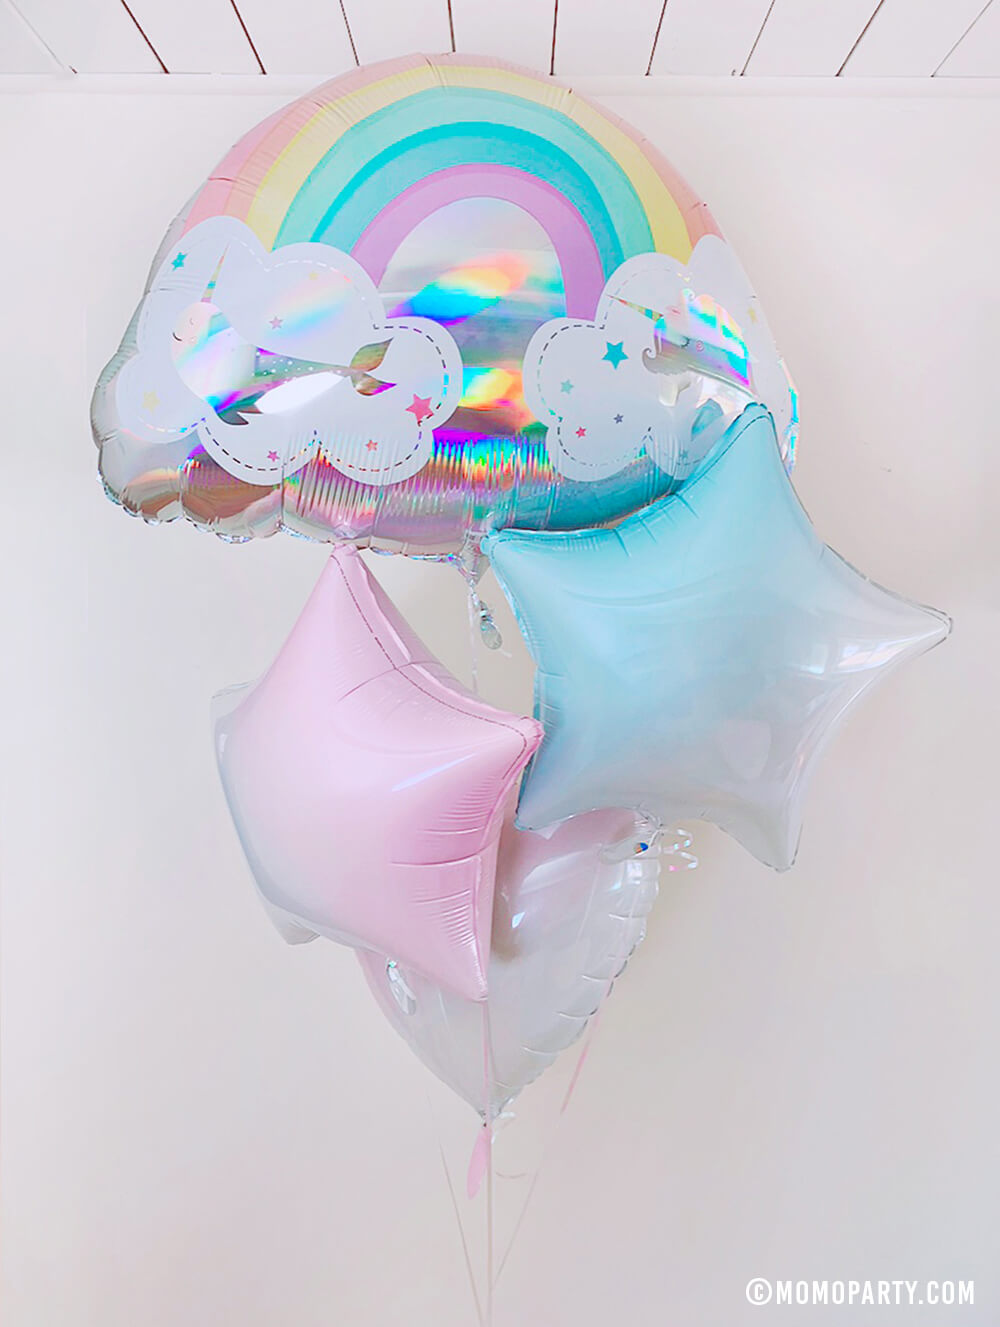 Anagram 28" Holographic Magical Rainbow Unicorn And Narwhal Foil Balloon with Party Brands 18" Junior Gradient Pastel Pink Star Shaped Foil Balloon and Party Brands 18" Junior Gradient Pastel Pink Heart Shaped Foil Balloon and Party Brands 18" Junior Gradient Pastel Blue Star Shaped Foil Balloon, a pastel-colored bouquet for the ultimate dreamy, shine and sparkle, An amazing way to decorate a modern pastel rainbow themed party, unicorn birthday, party for girls or celebrate someone special!